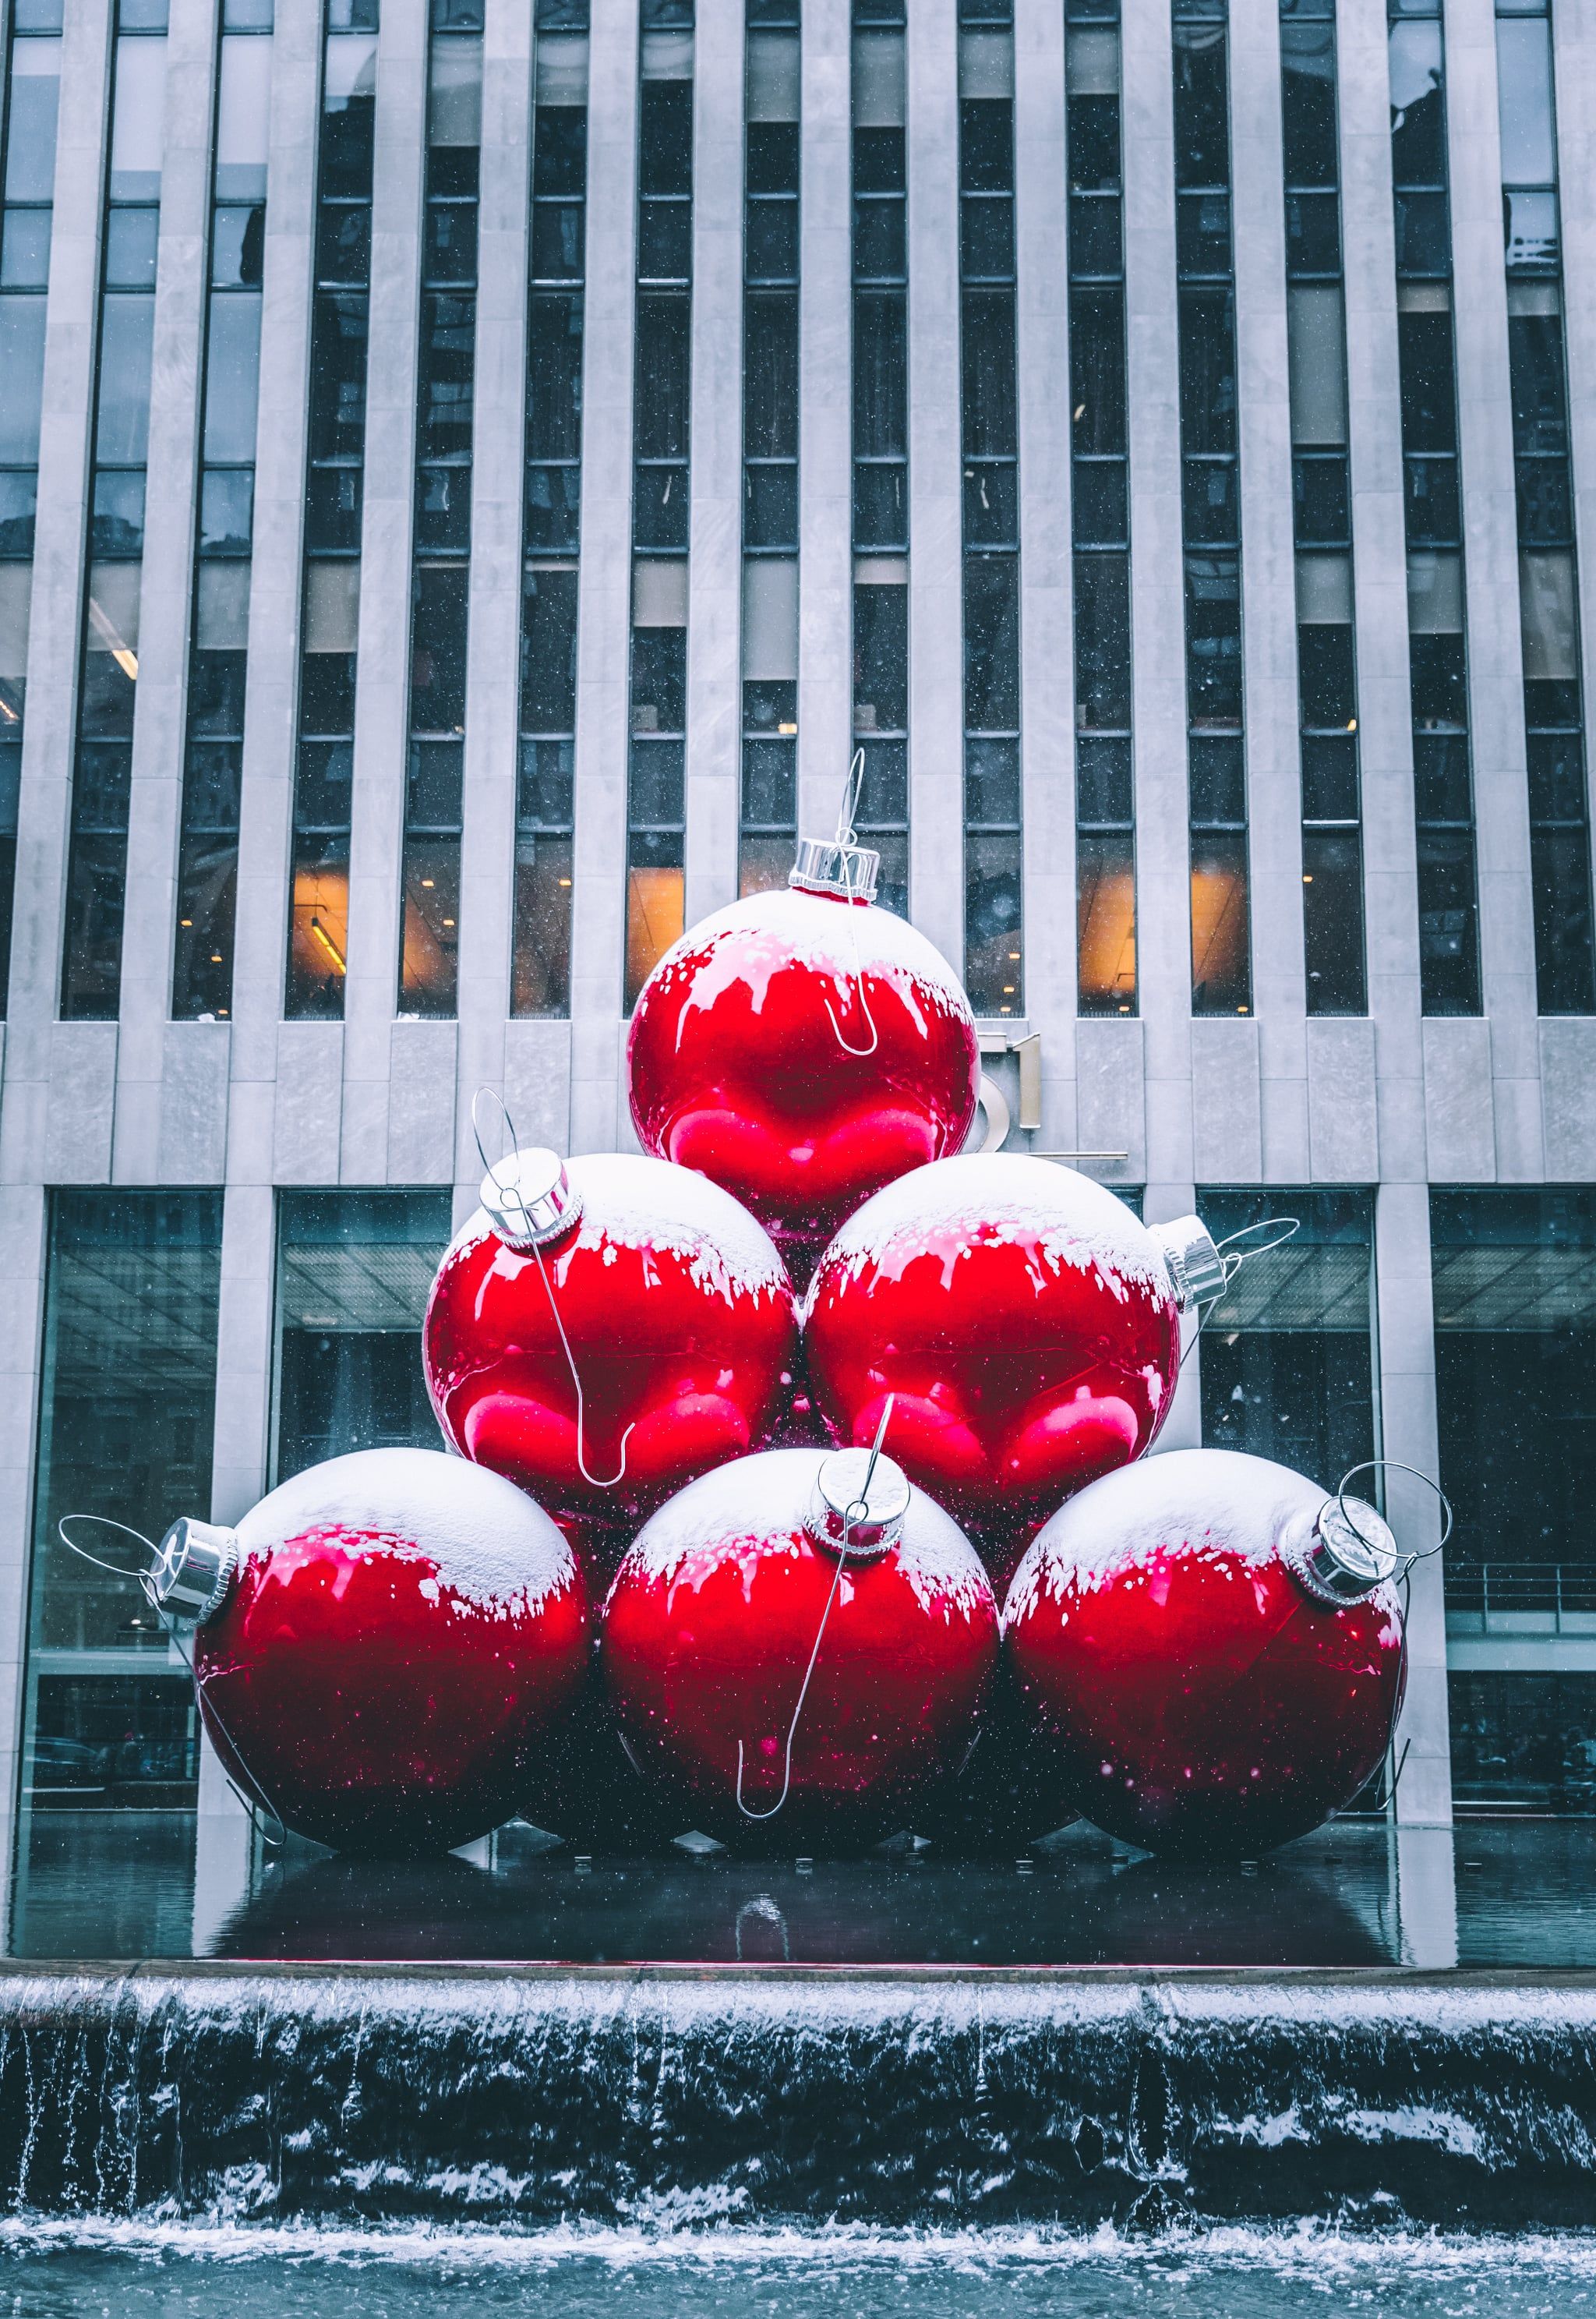 A group of red ornaments in front - New York